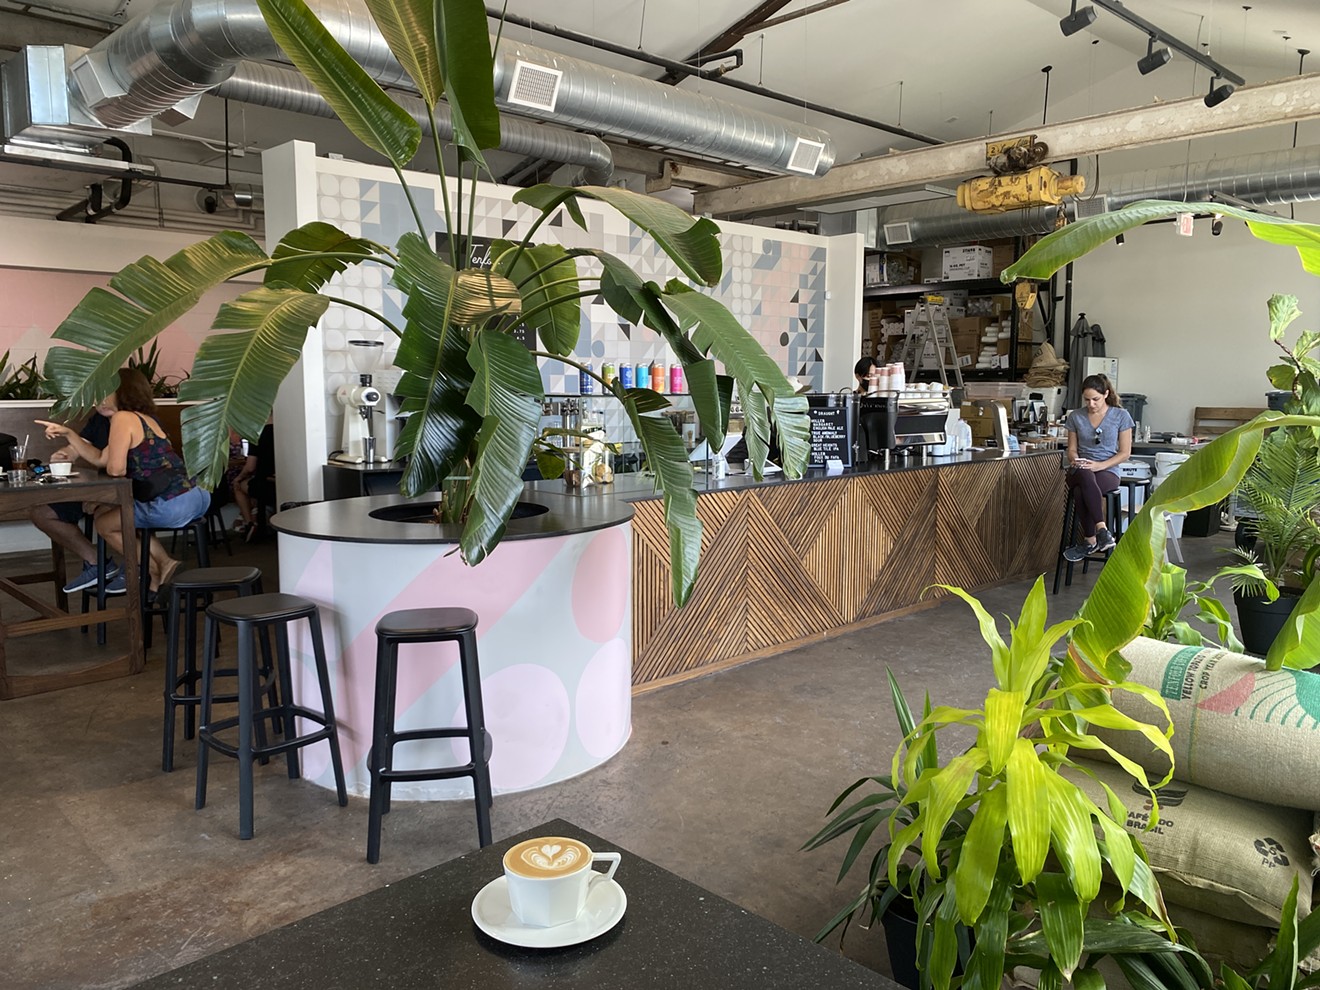 Enjoy a perfect cup of coffee in Tenfold Coffee Company's warehouse-chic digs.